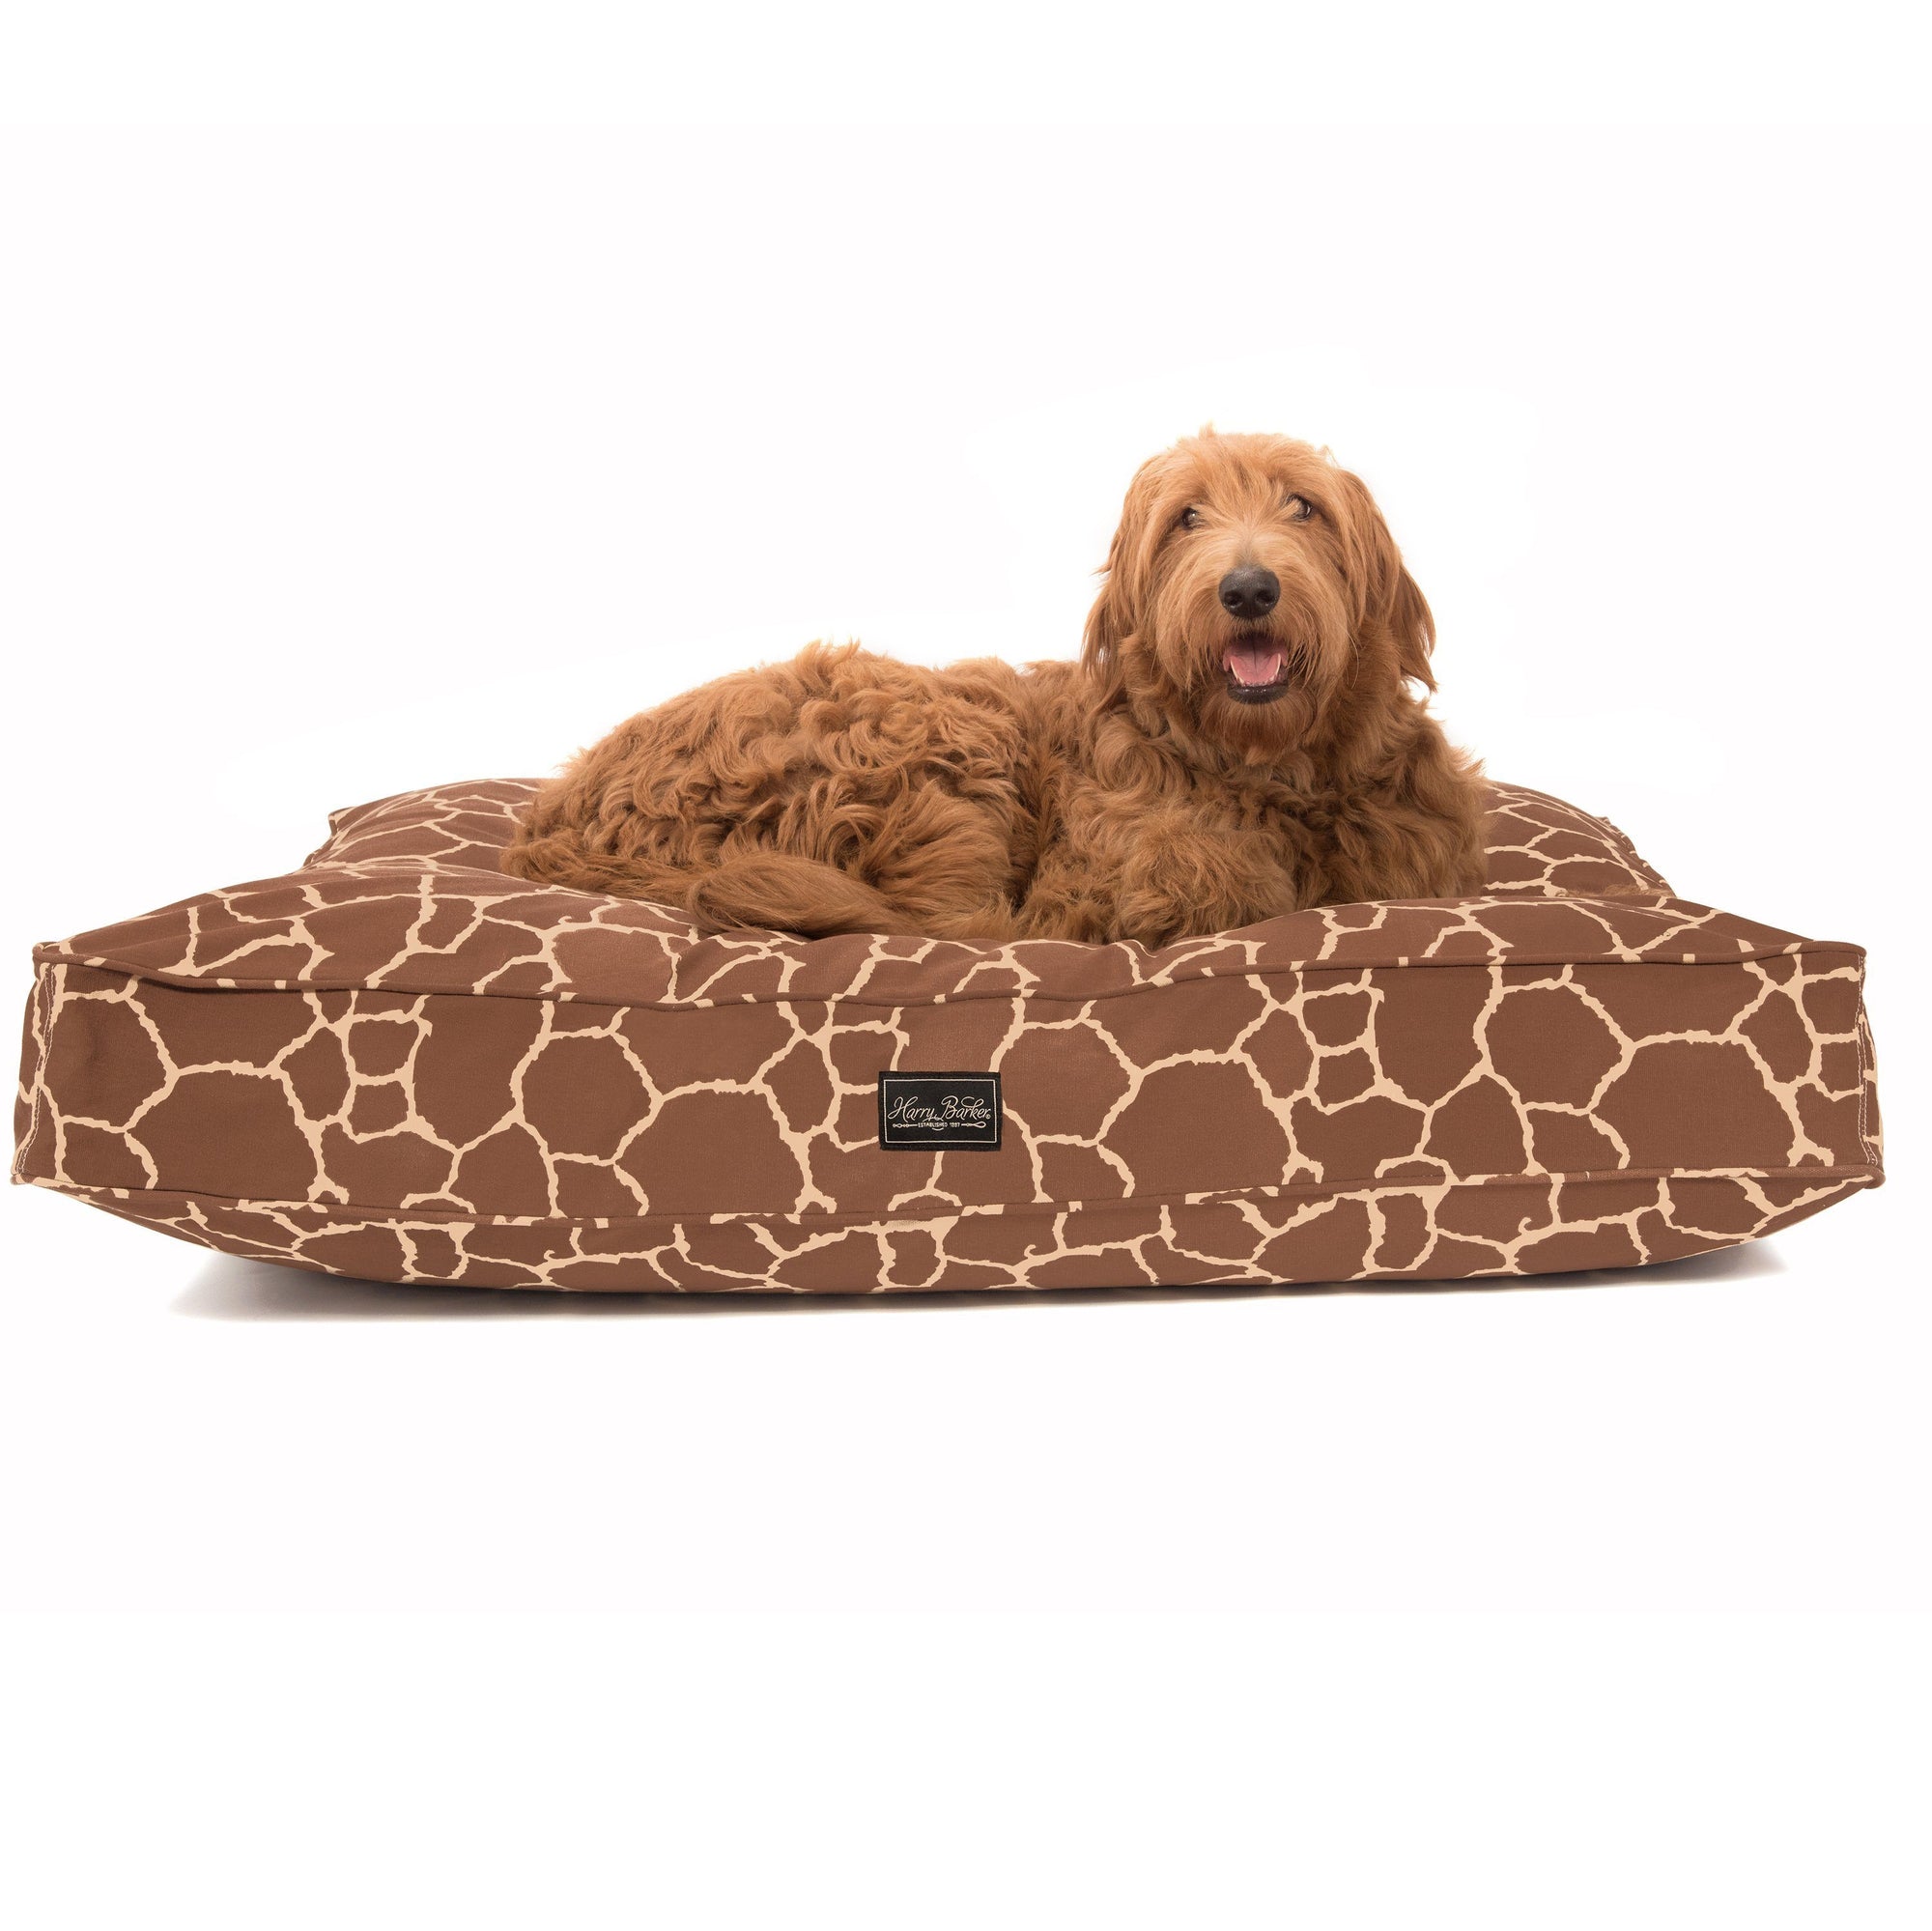 Bed Cover - Giraffe Cotton Canvas Dog Bed Cover